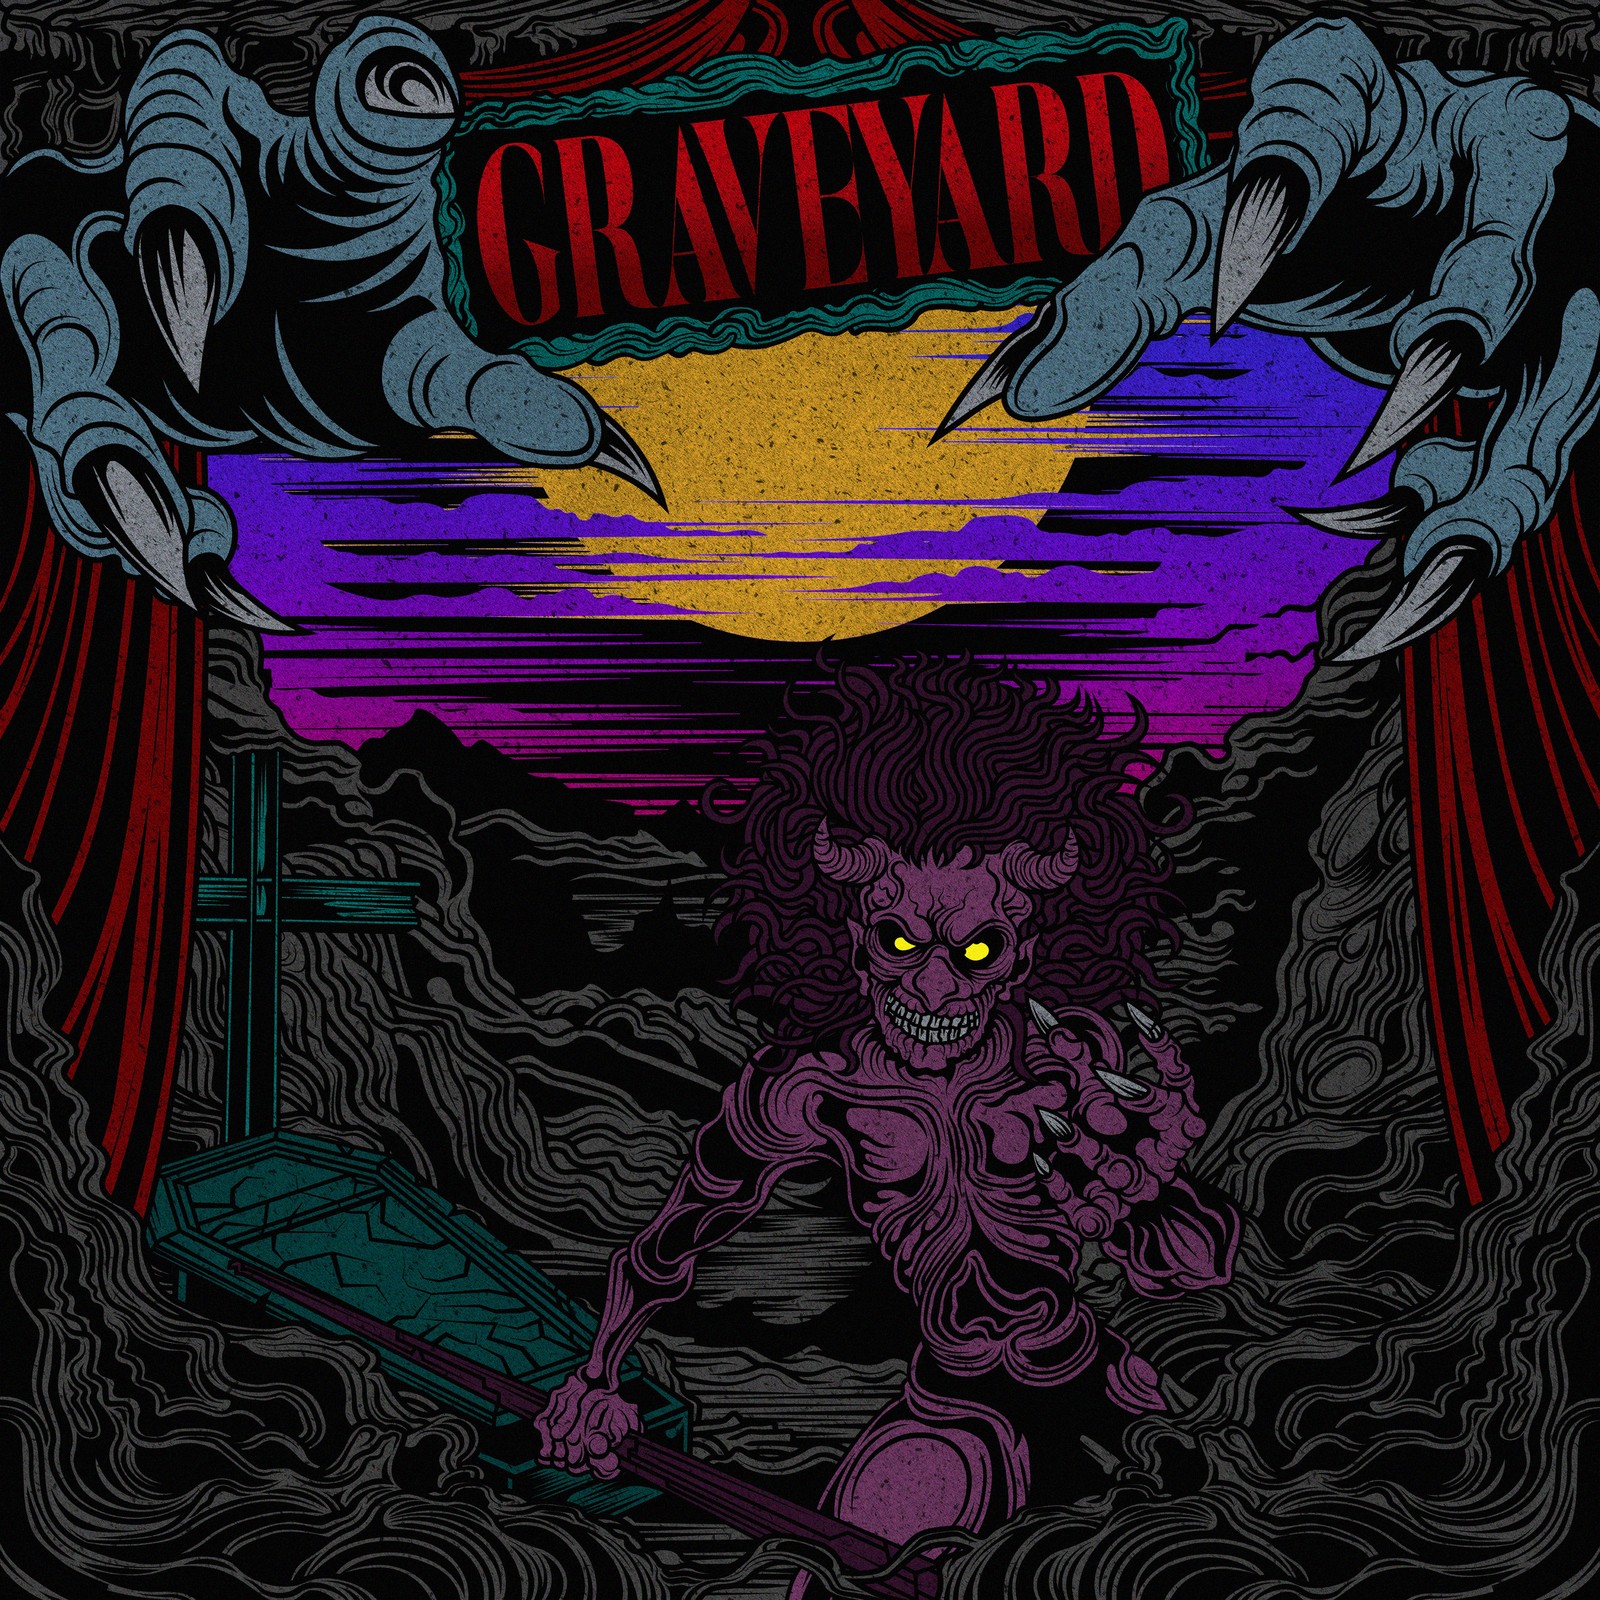 GIVEN BY THE FLAMES – GRAVEYARD [FLAC / WEB] [2020.11.27]